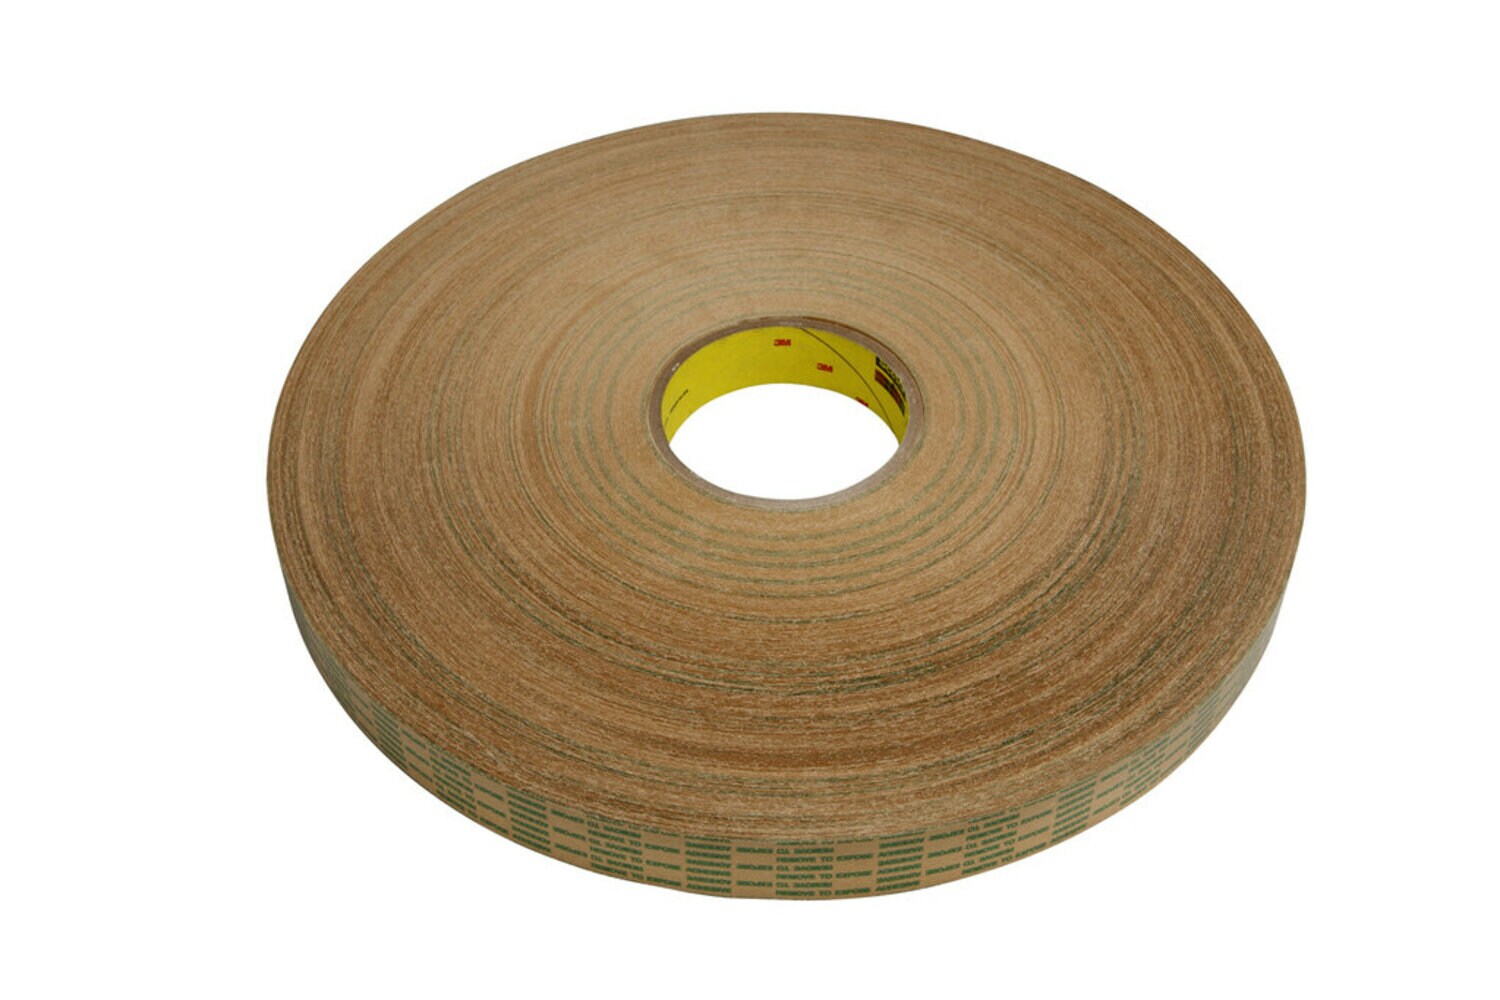 7000048709 - 3M Adhesive Transfer Tape Extended Liner 450XL Translucent, 1 in x 750
yd, 1 mil, 9 rolls per case